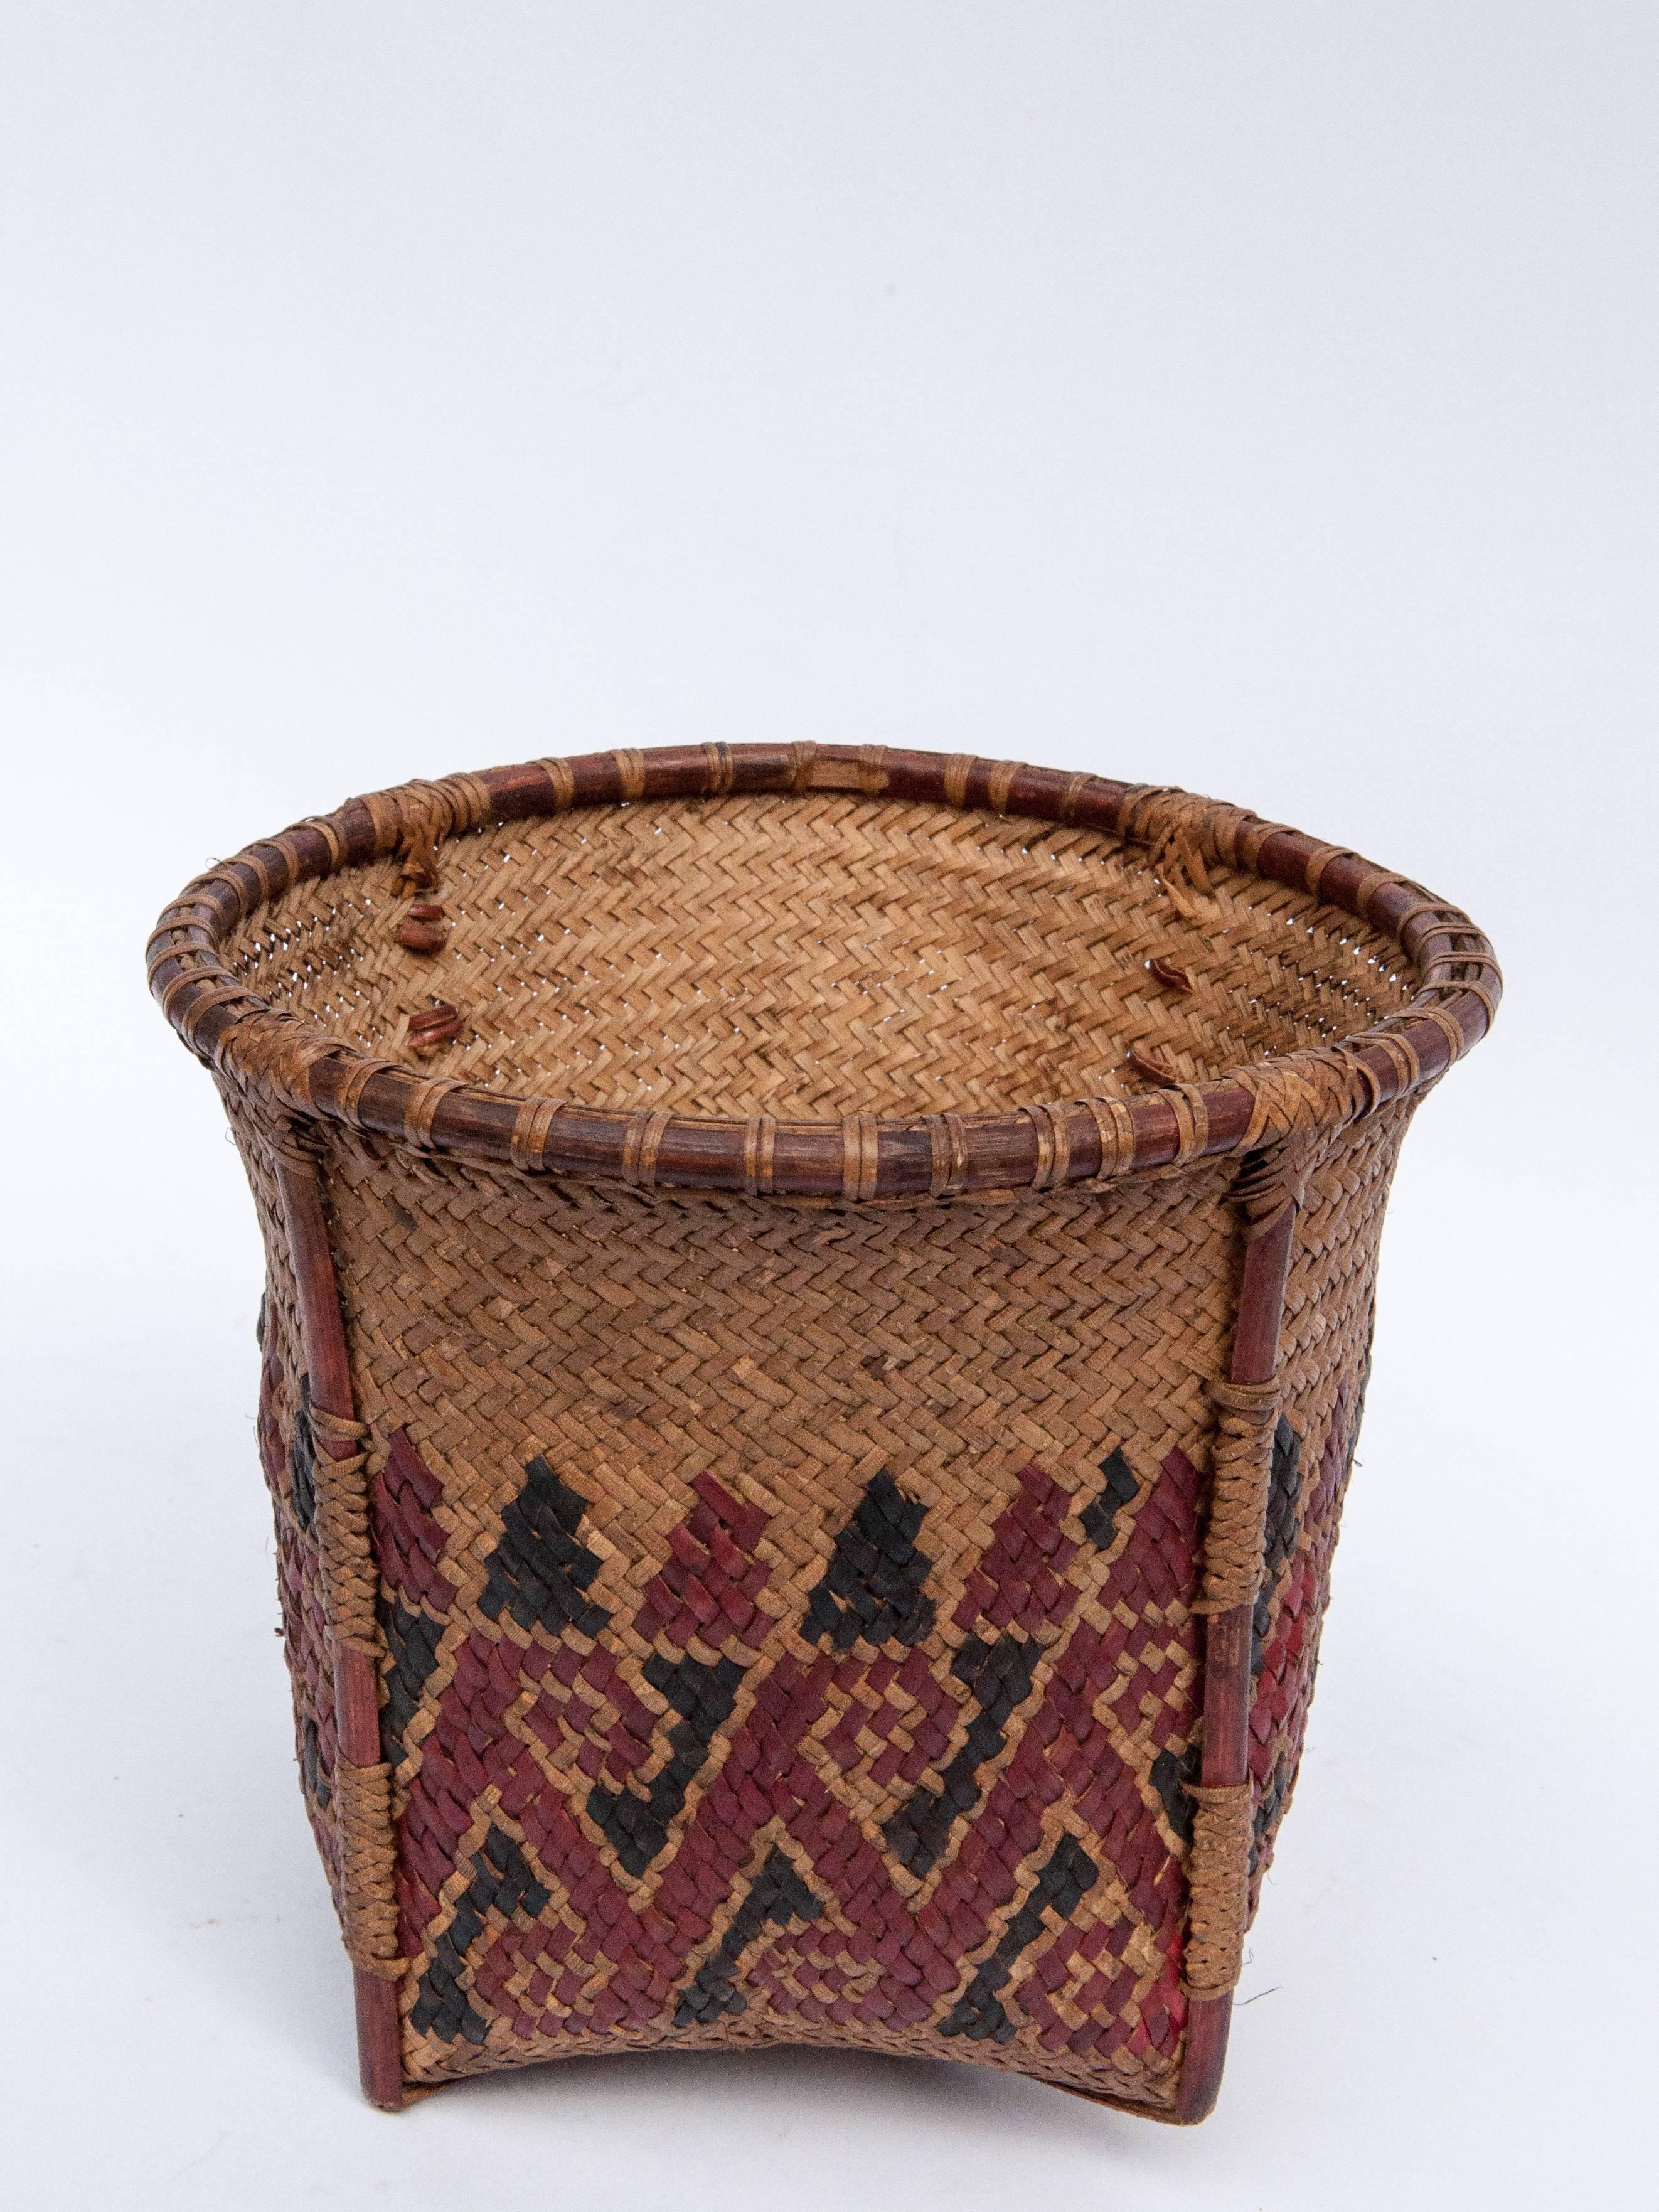 Tribal Small Vintage Collecting Basket with Colored Design, Borneo, Mid-20th Century